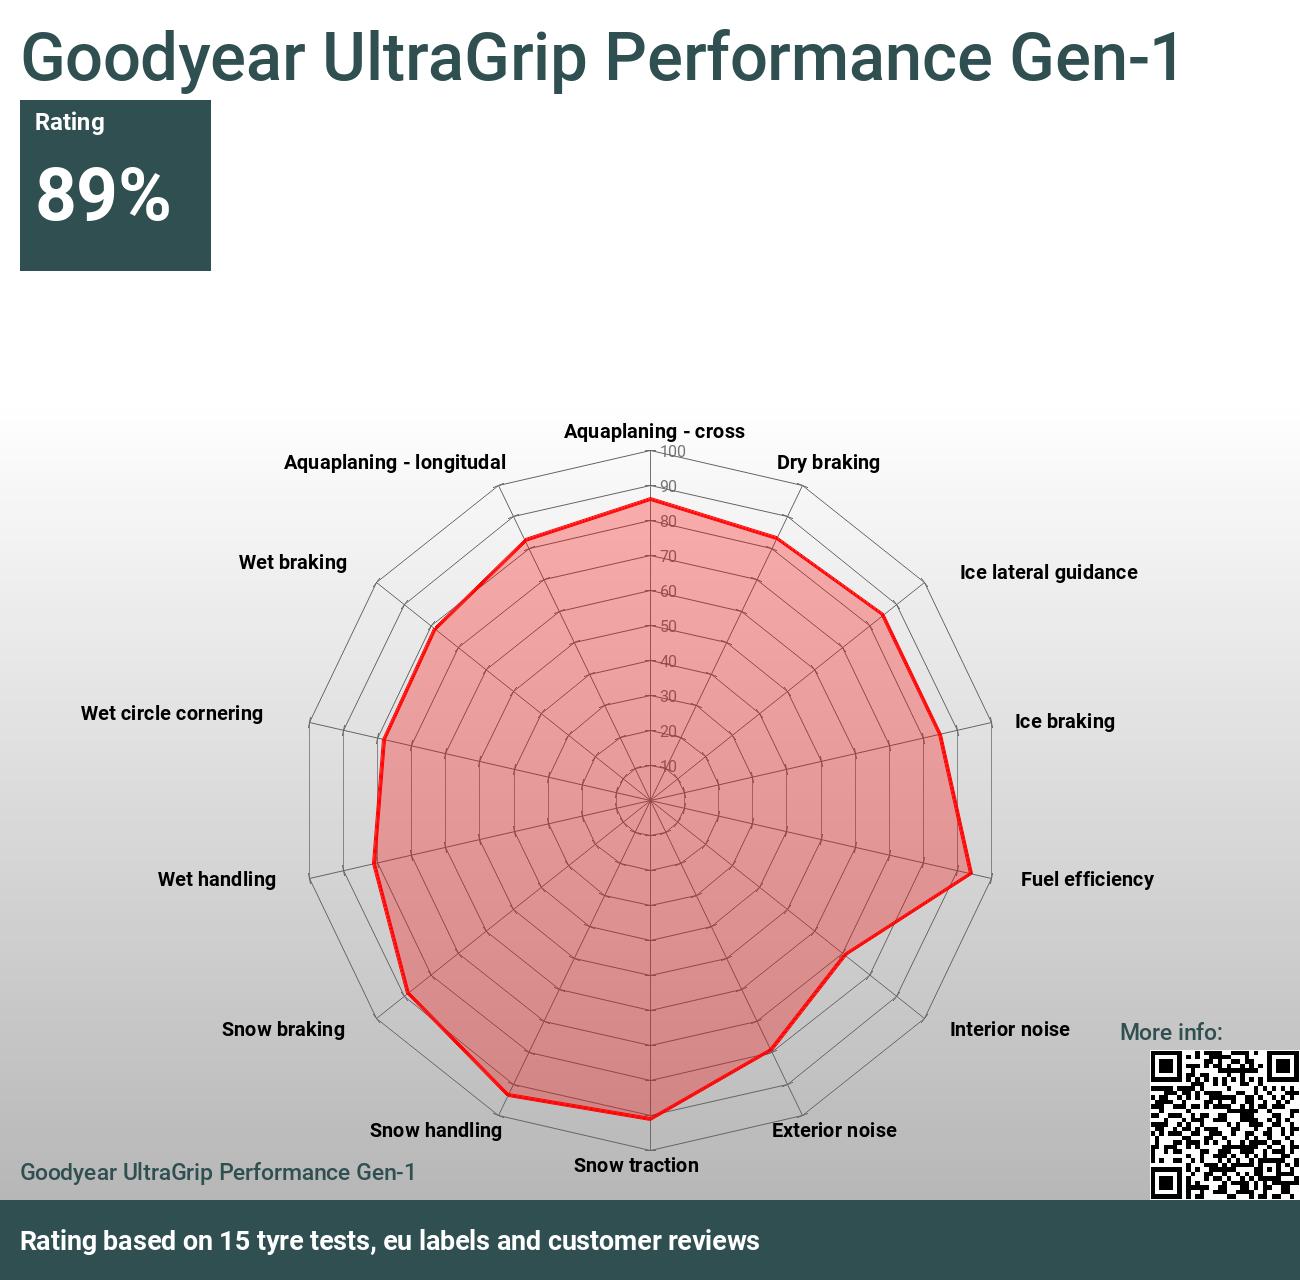 2024 Goodyear tests - UltraGrip Reviews and Performance Gen-1